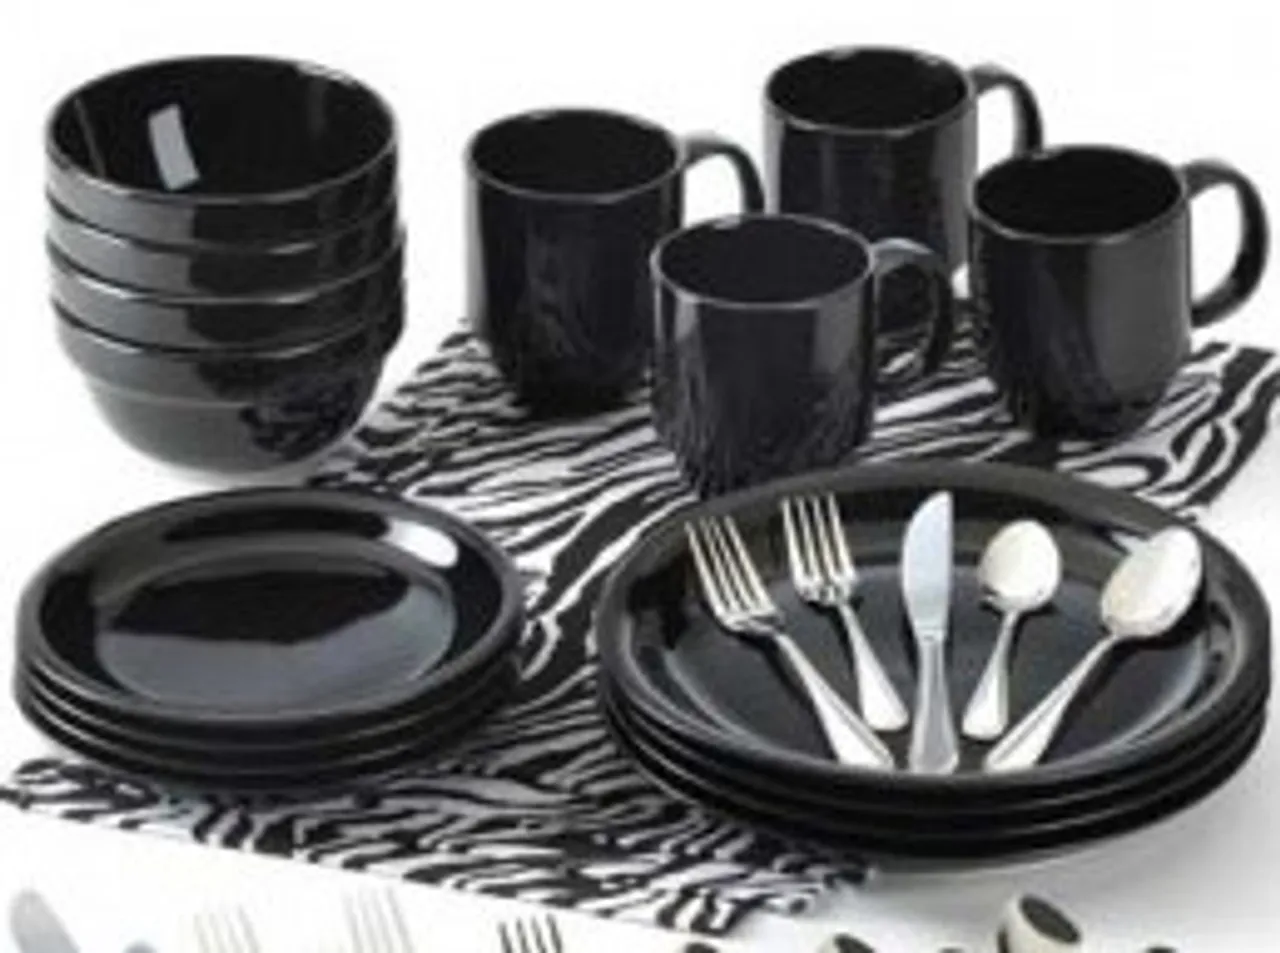 Tips on how to maintain your dinnerware and kitche